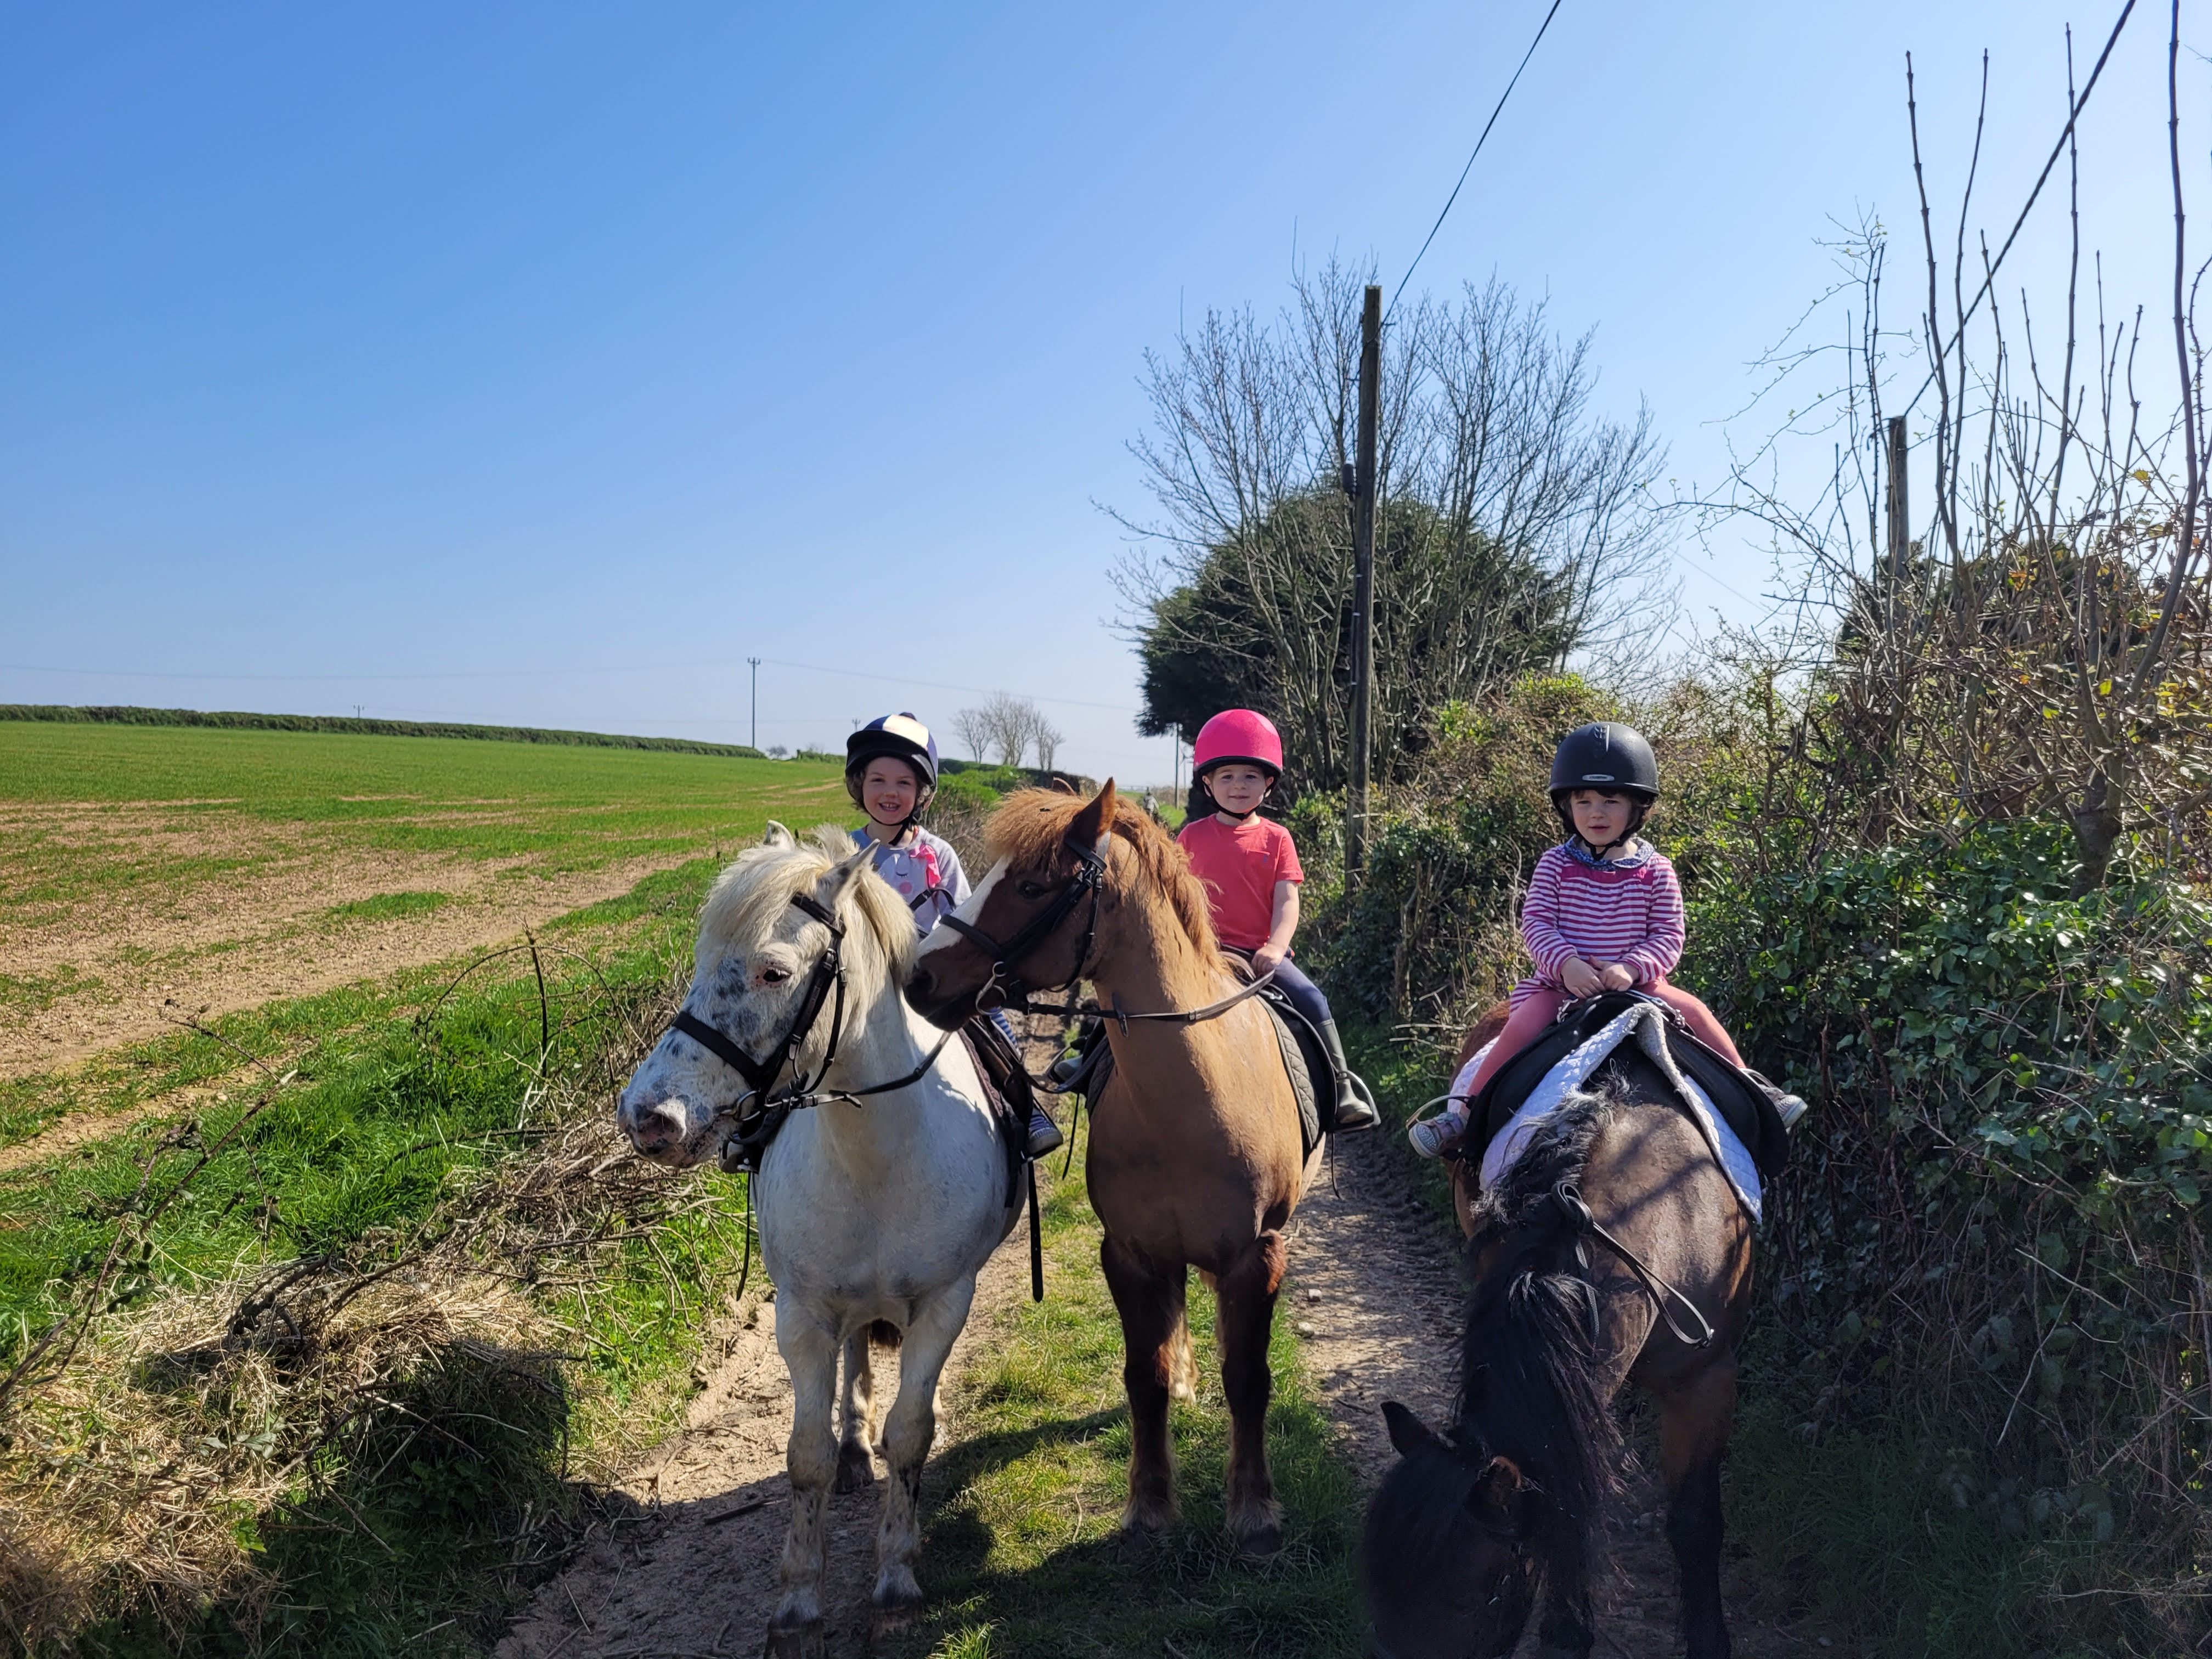 pony rides for young children in cornwall